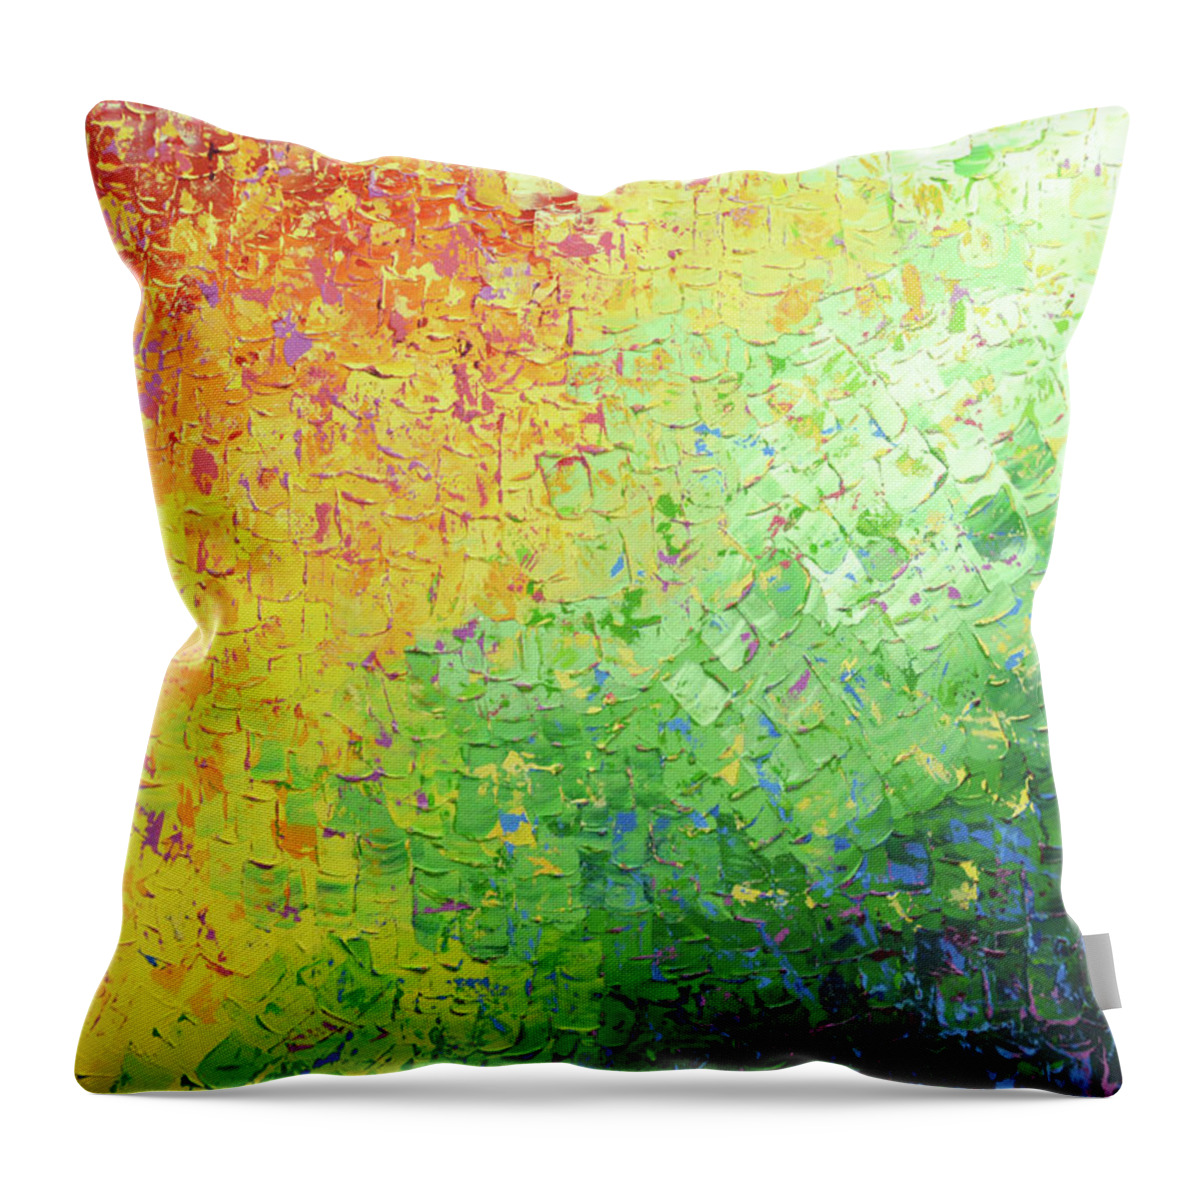  Throw Pillow featuring the painting Garden Party by Linda Bailey